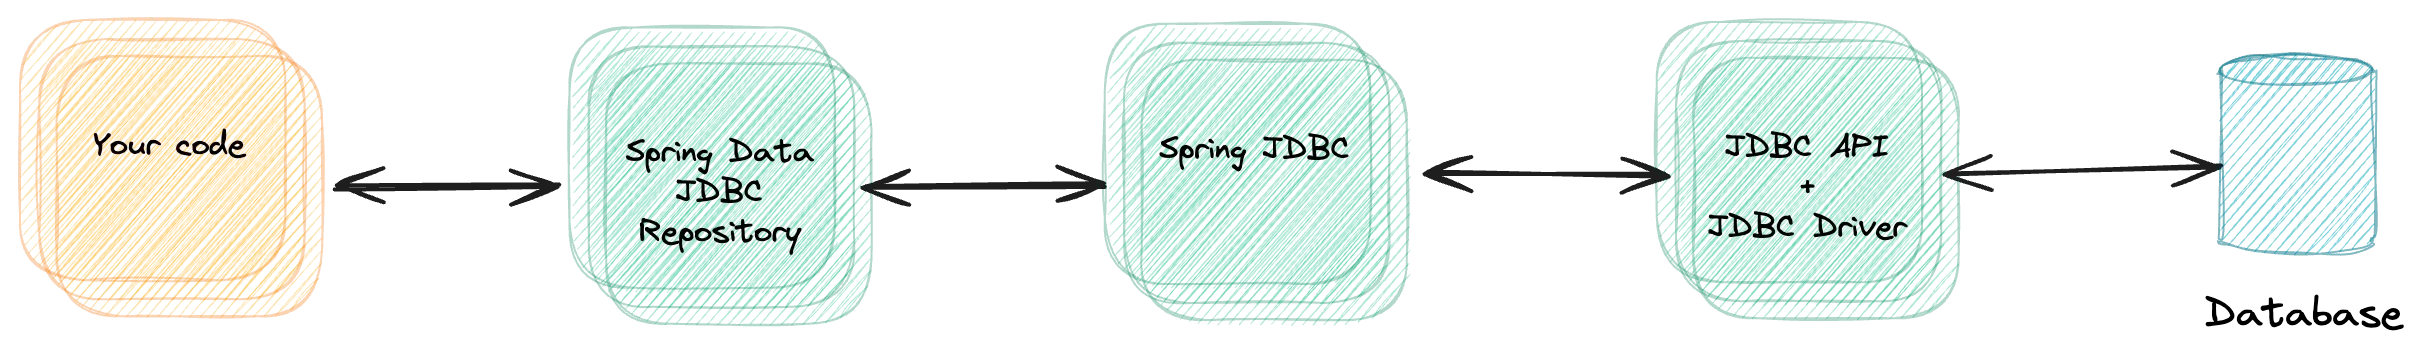 Image showing the abstractions between your code and the database with Spring Data JDBC, including "Spring JDBC", the "JDBC API" and the "JDBC Driver"